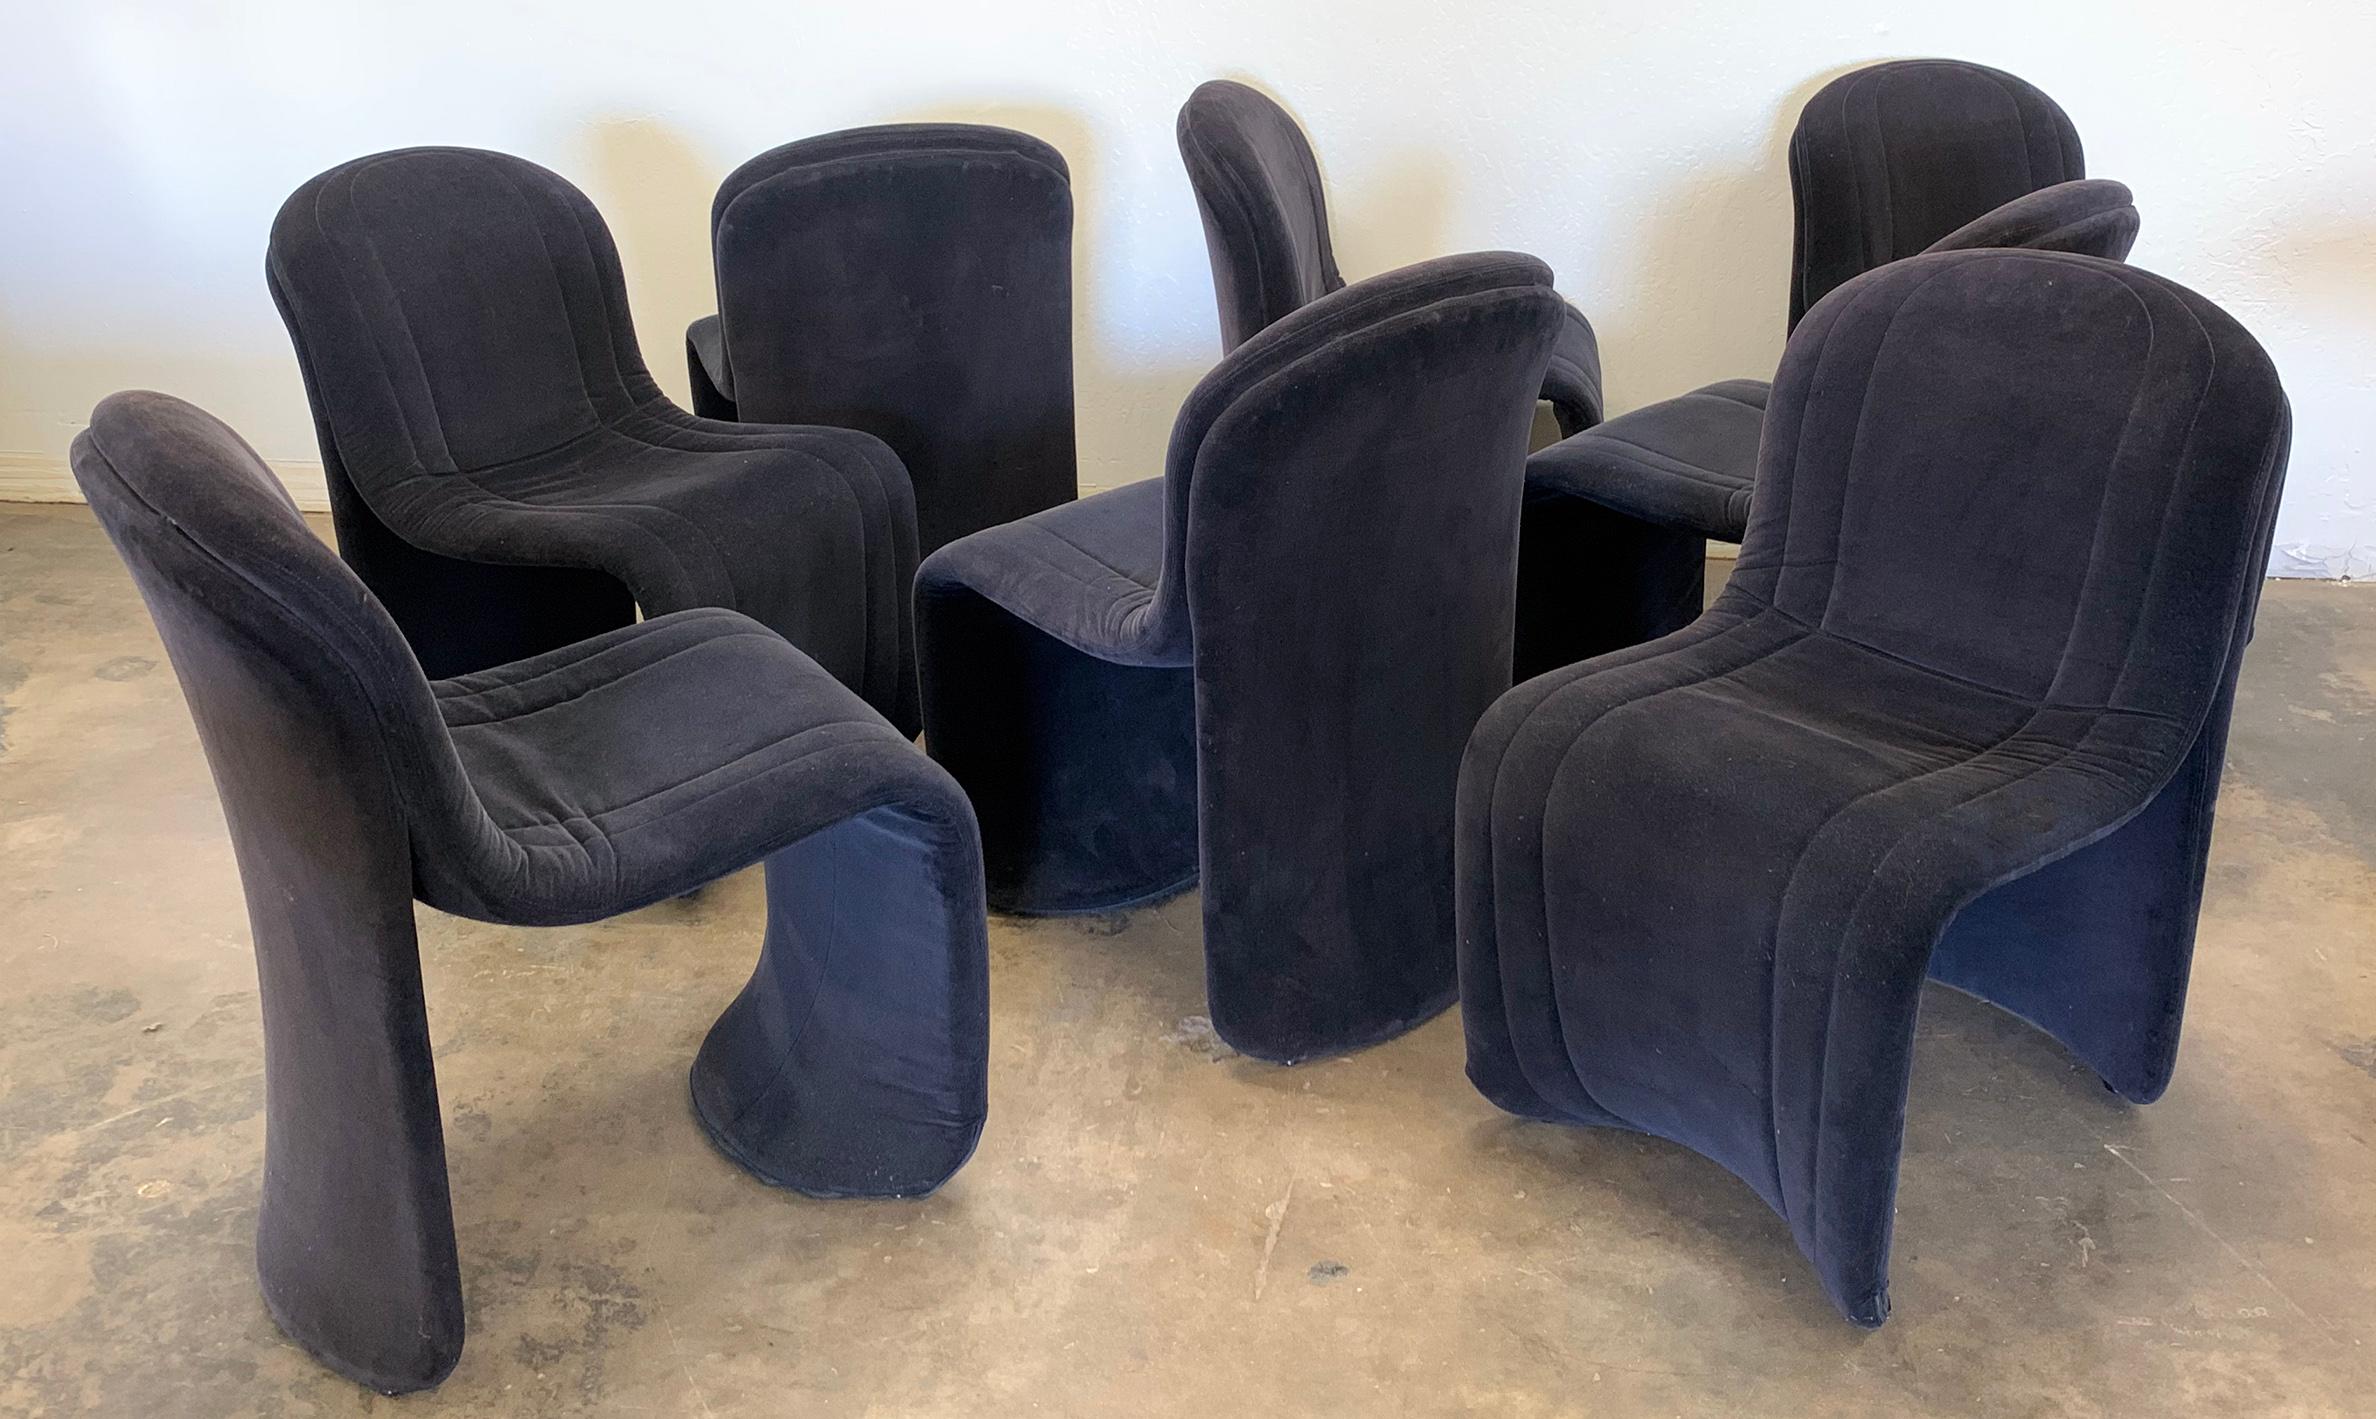 postmodern dining chairs